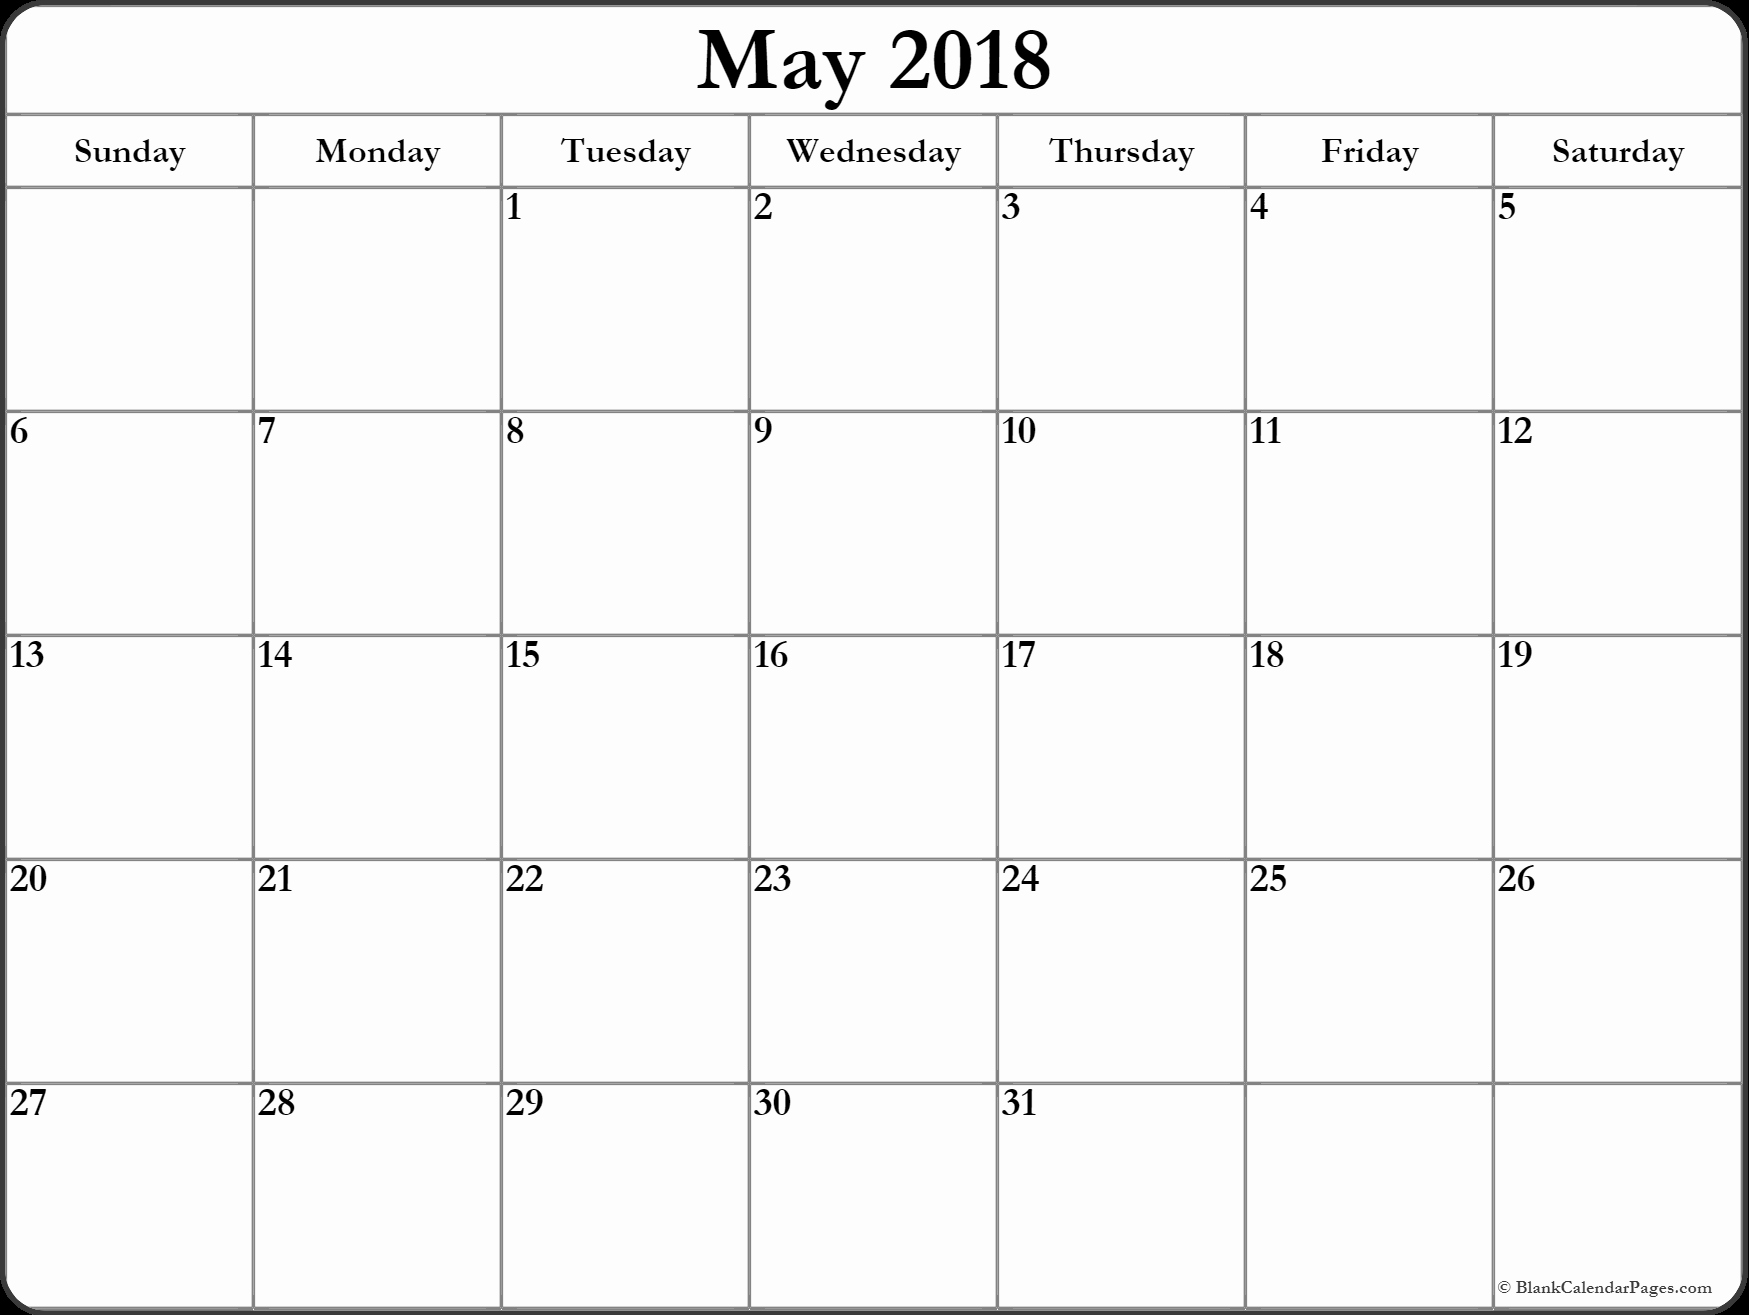 Free May 2018 Calendar Template Best Of May 2018 Printable Calendar 8 Free Blank Templates